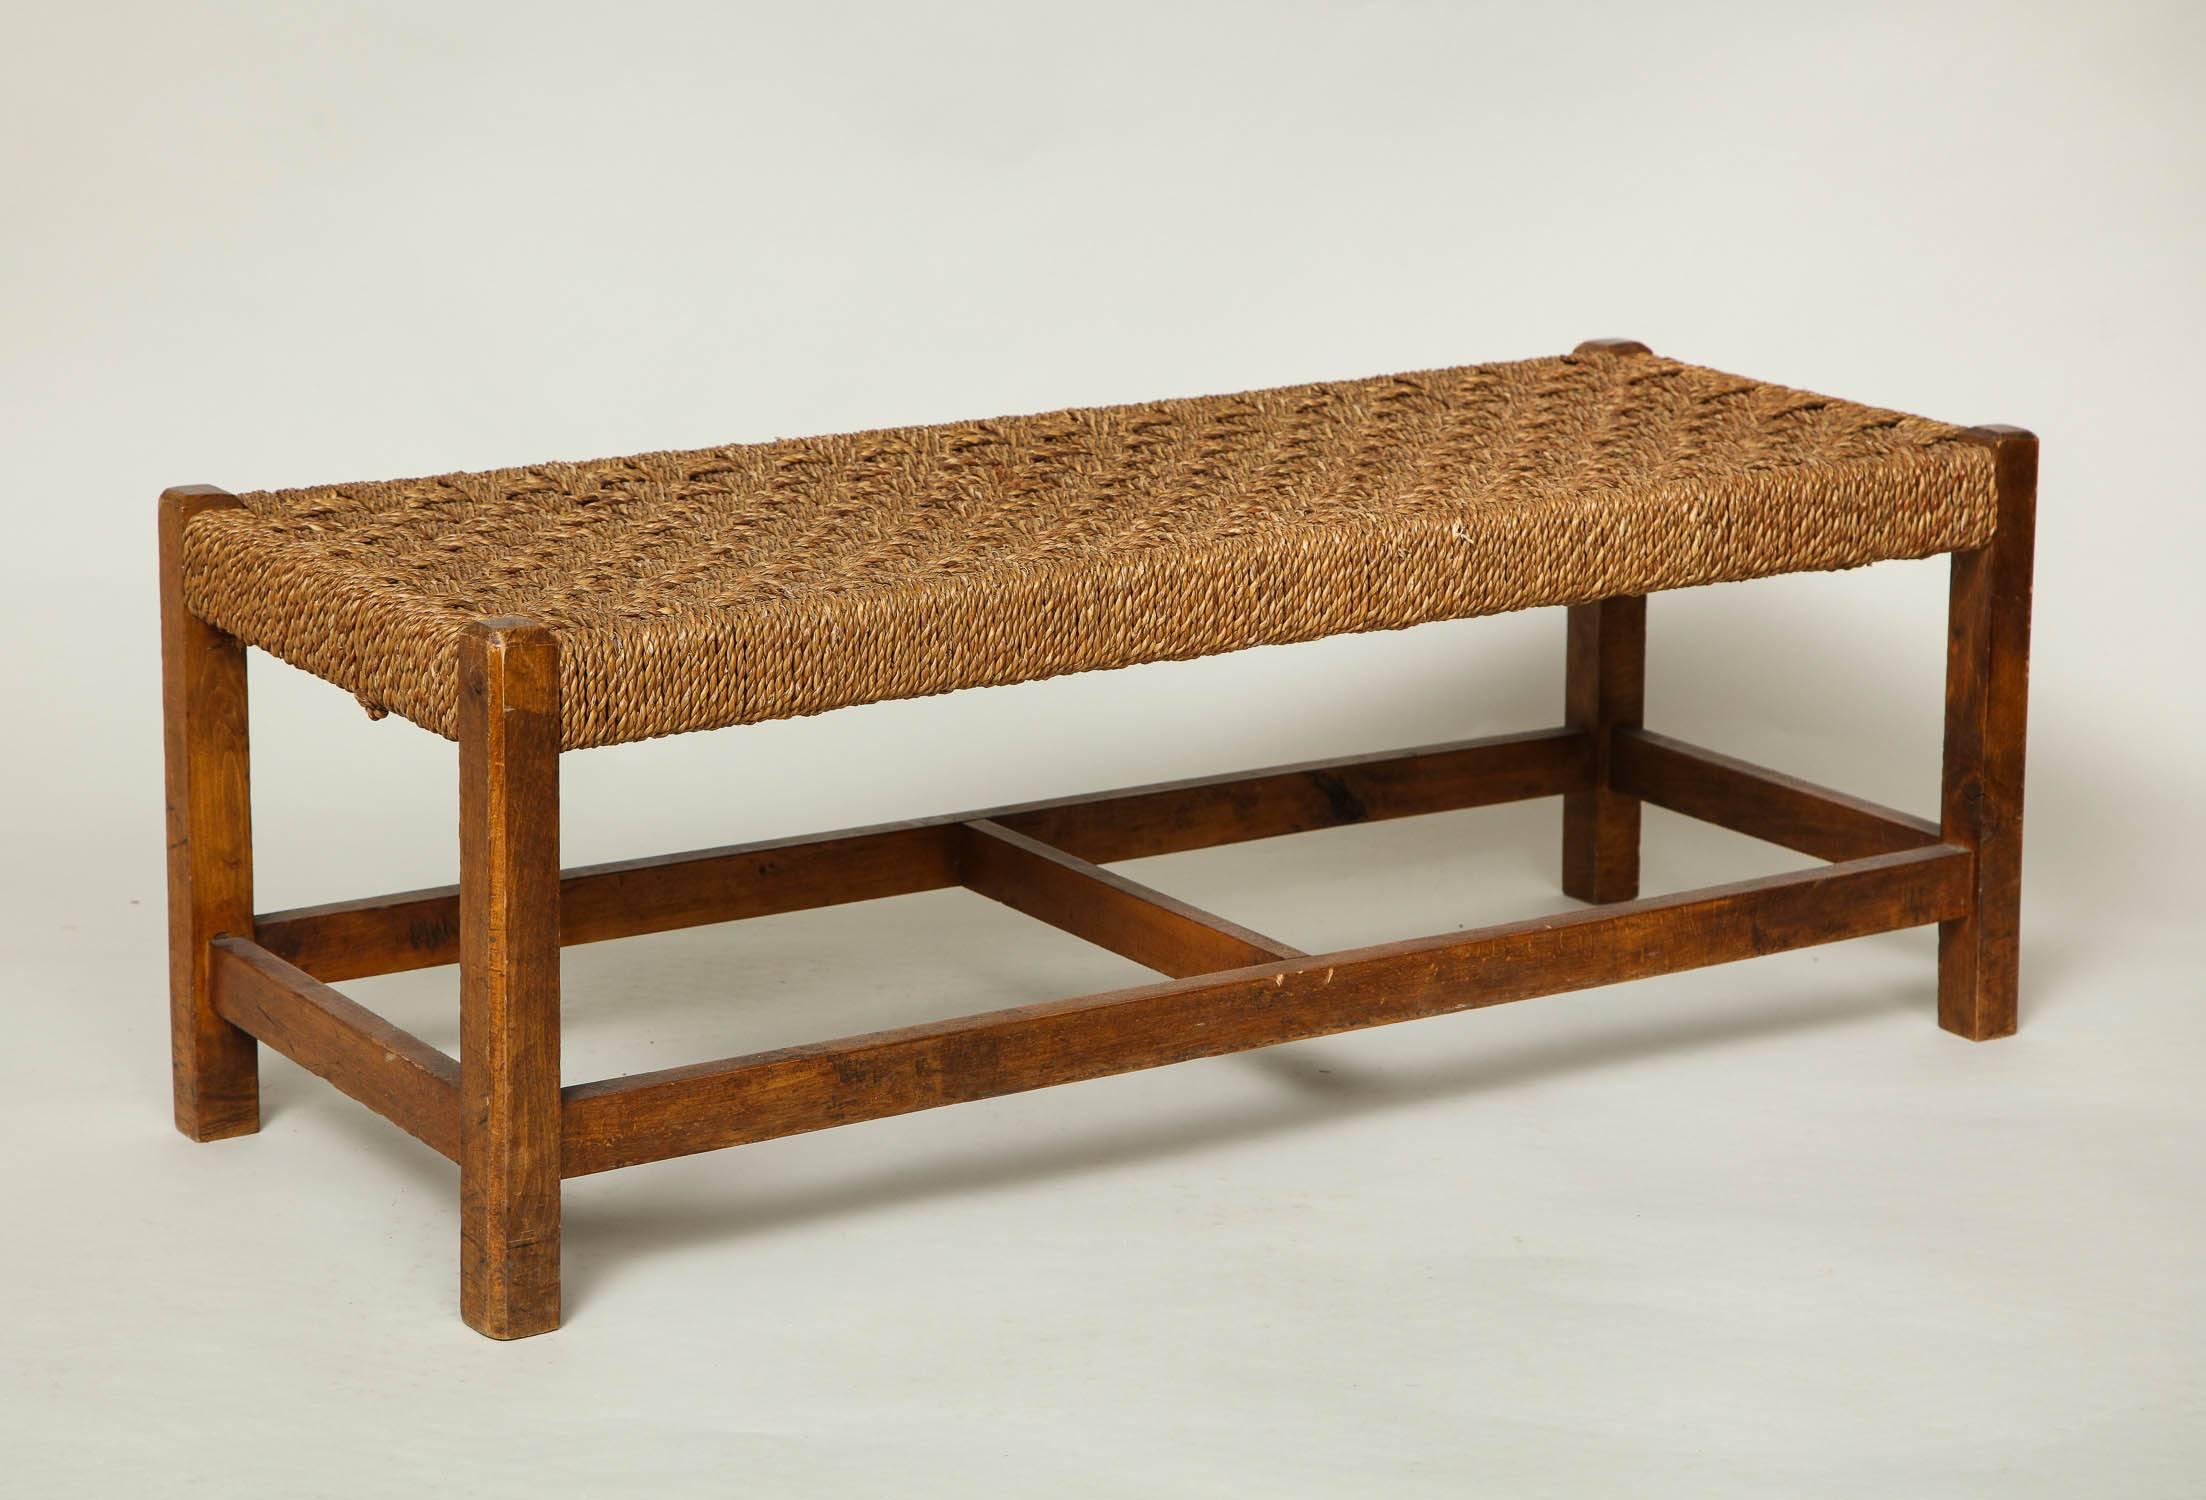 A rectangular oak luggage stool with square chamfered legs joined by stretchers and a deep woven hemp rope top, England, circa 1910. Small and handy for setting luggage on.